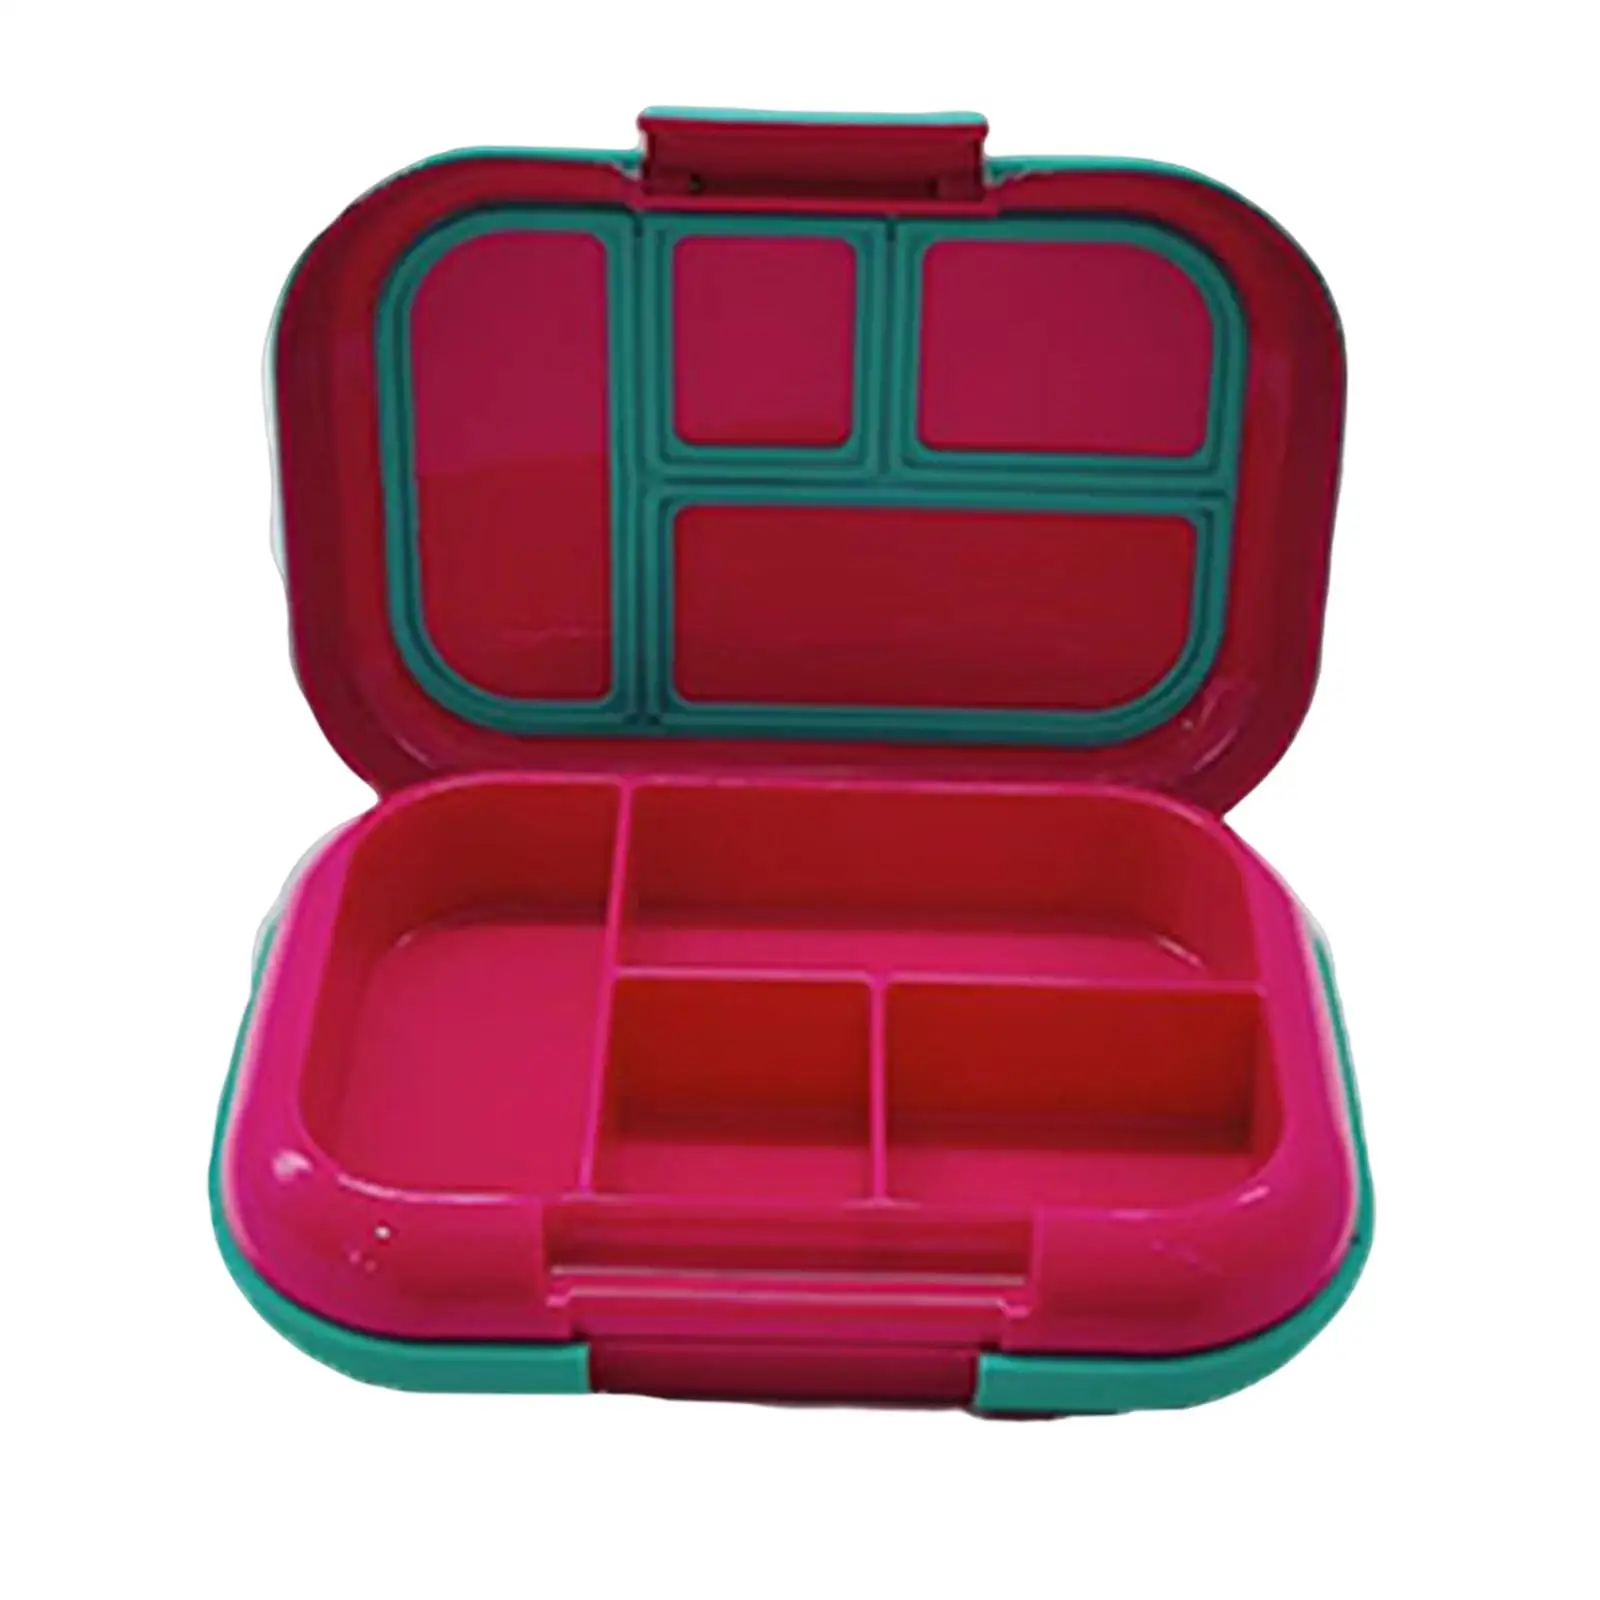 Portable Lunch Containers Food Storage Container for Picnic Camping